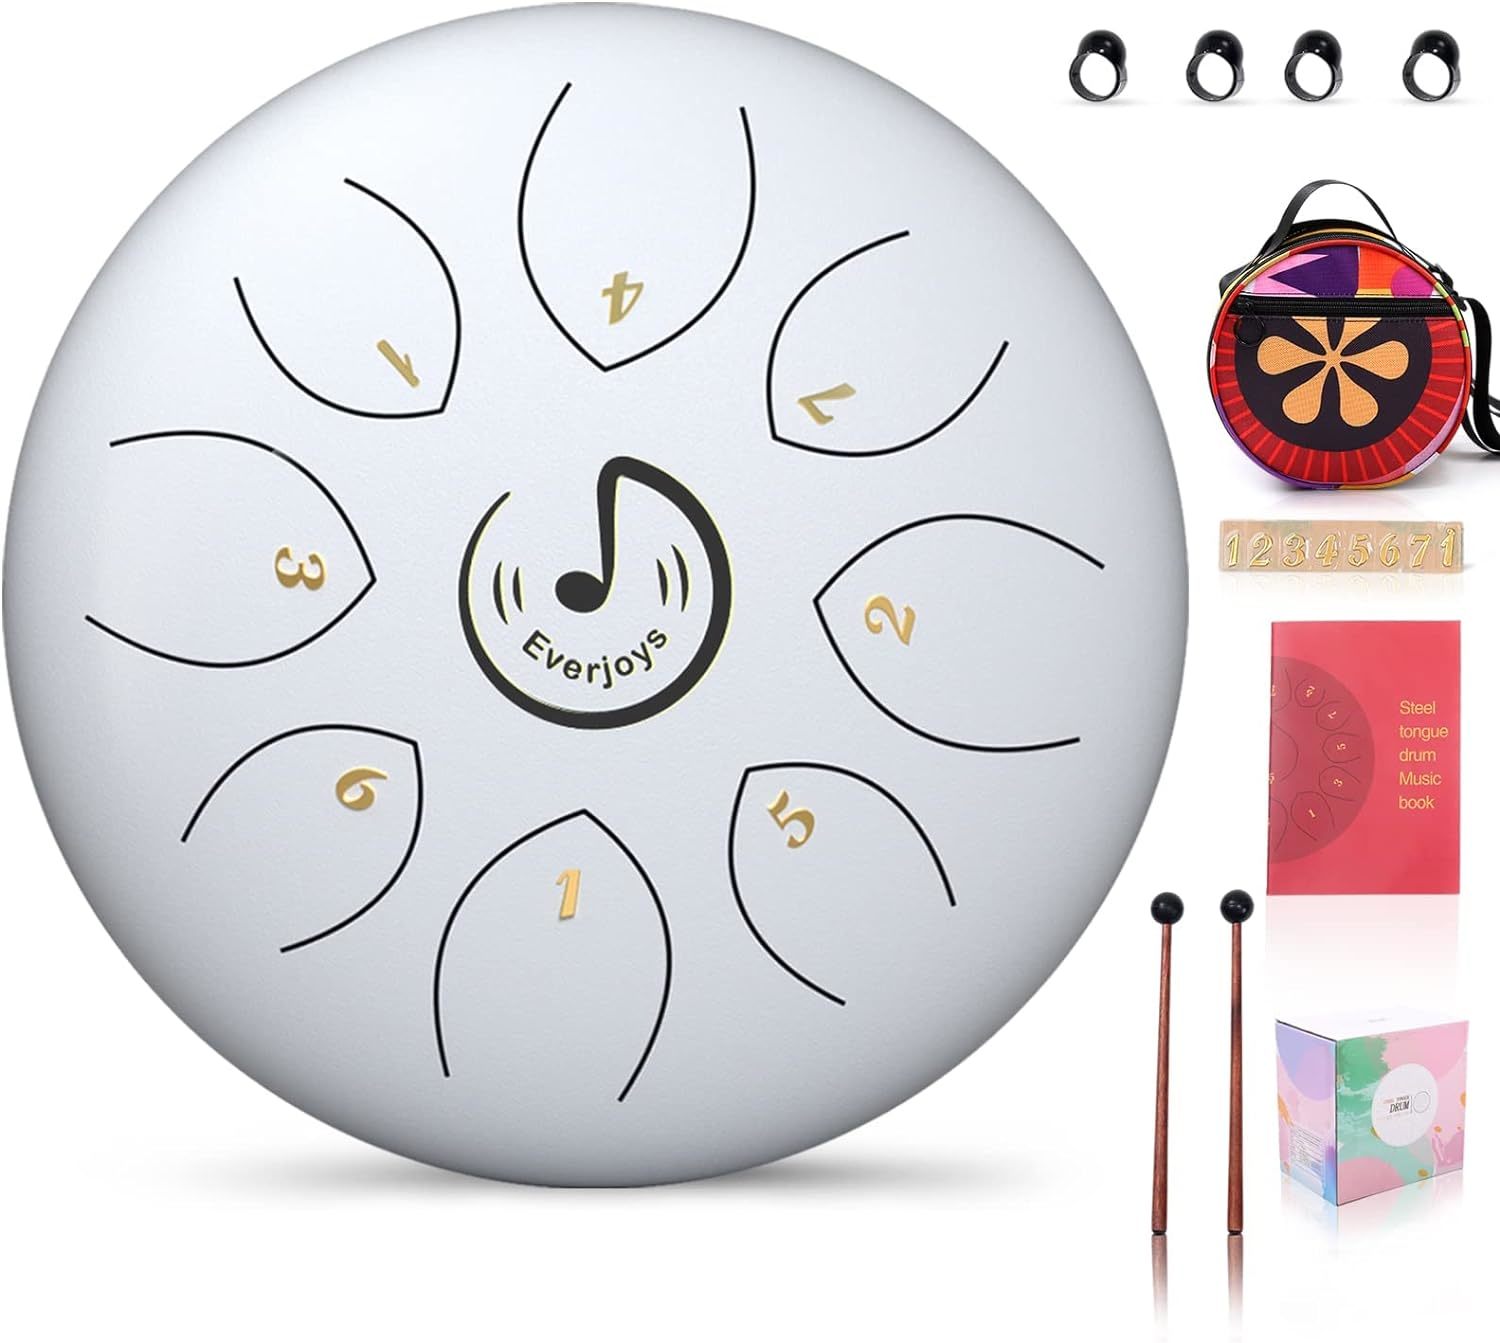 Primary image for Steel Tongue Drum, 8 Notes 6 Inches C-Key Handpan Drum Percussion Instrument